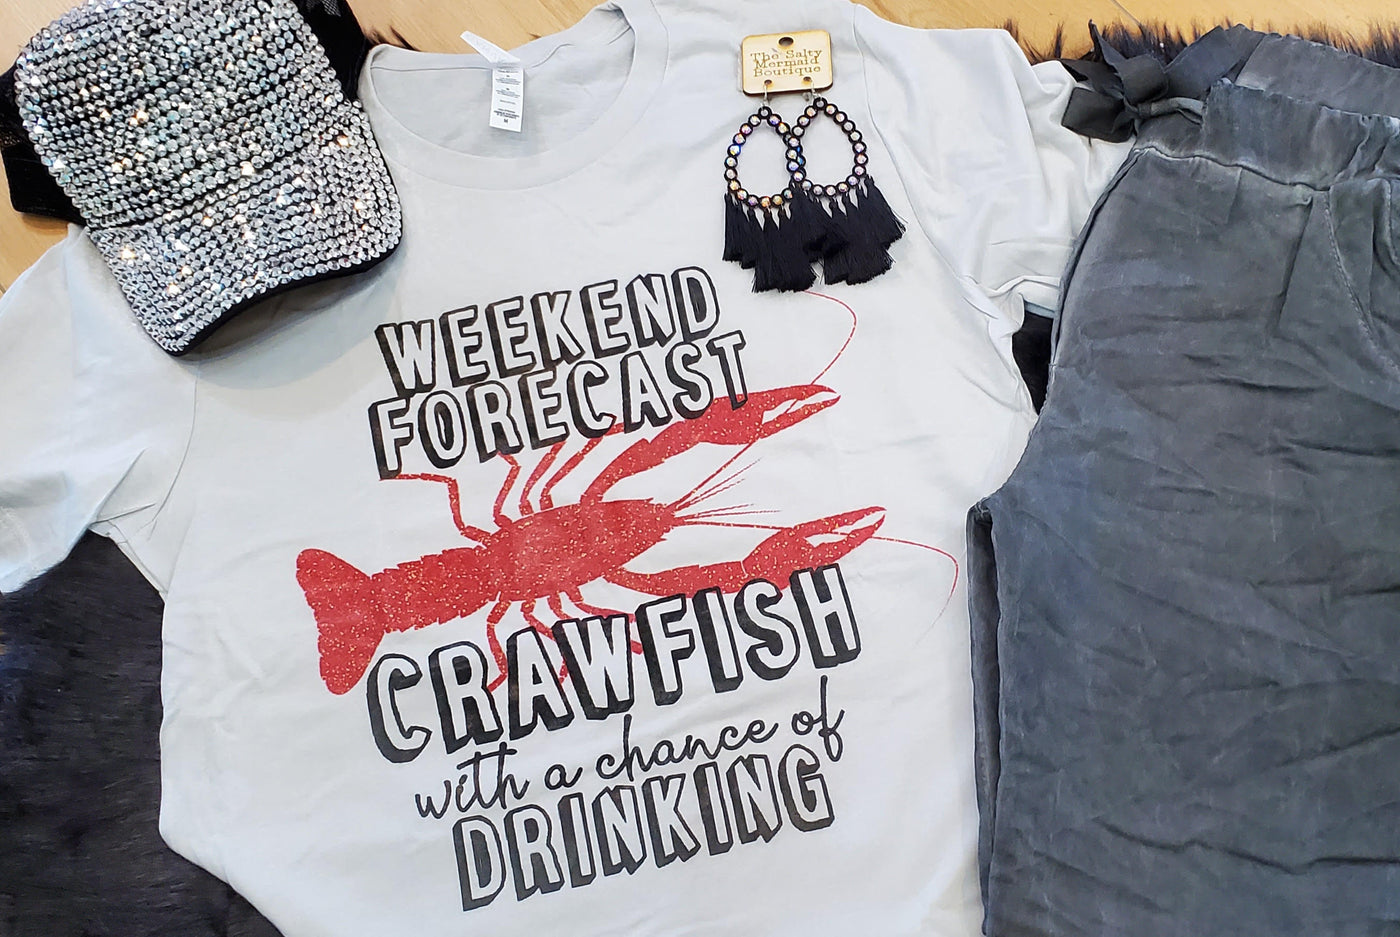 Crawfish with a chance of drinking Tee